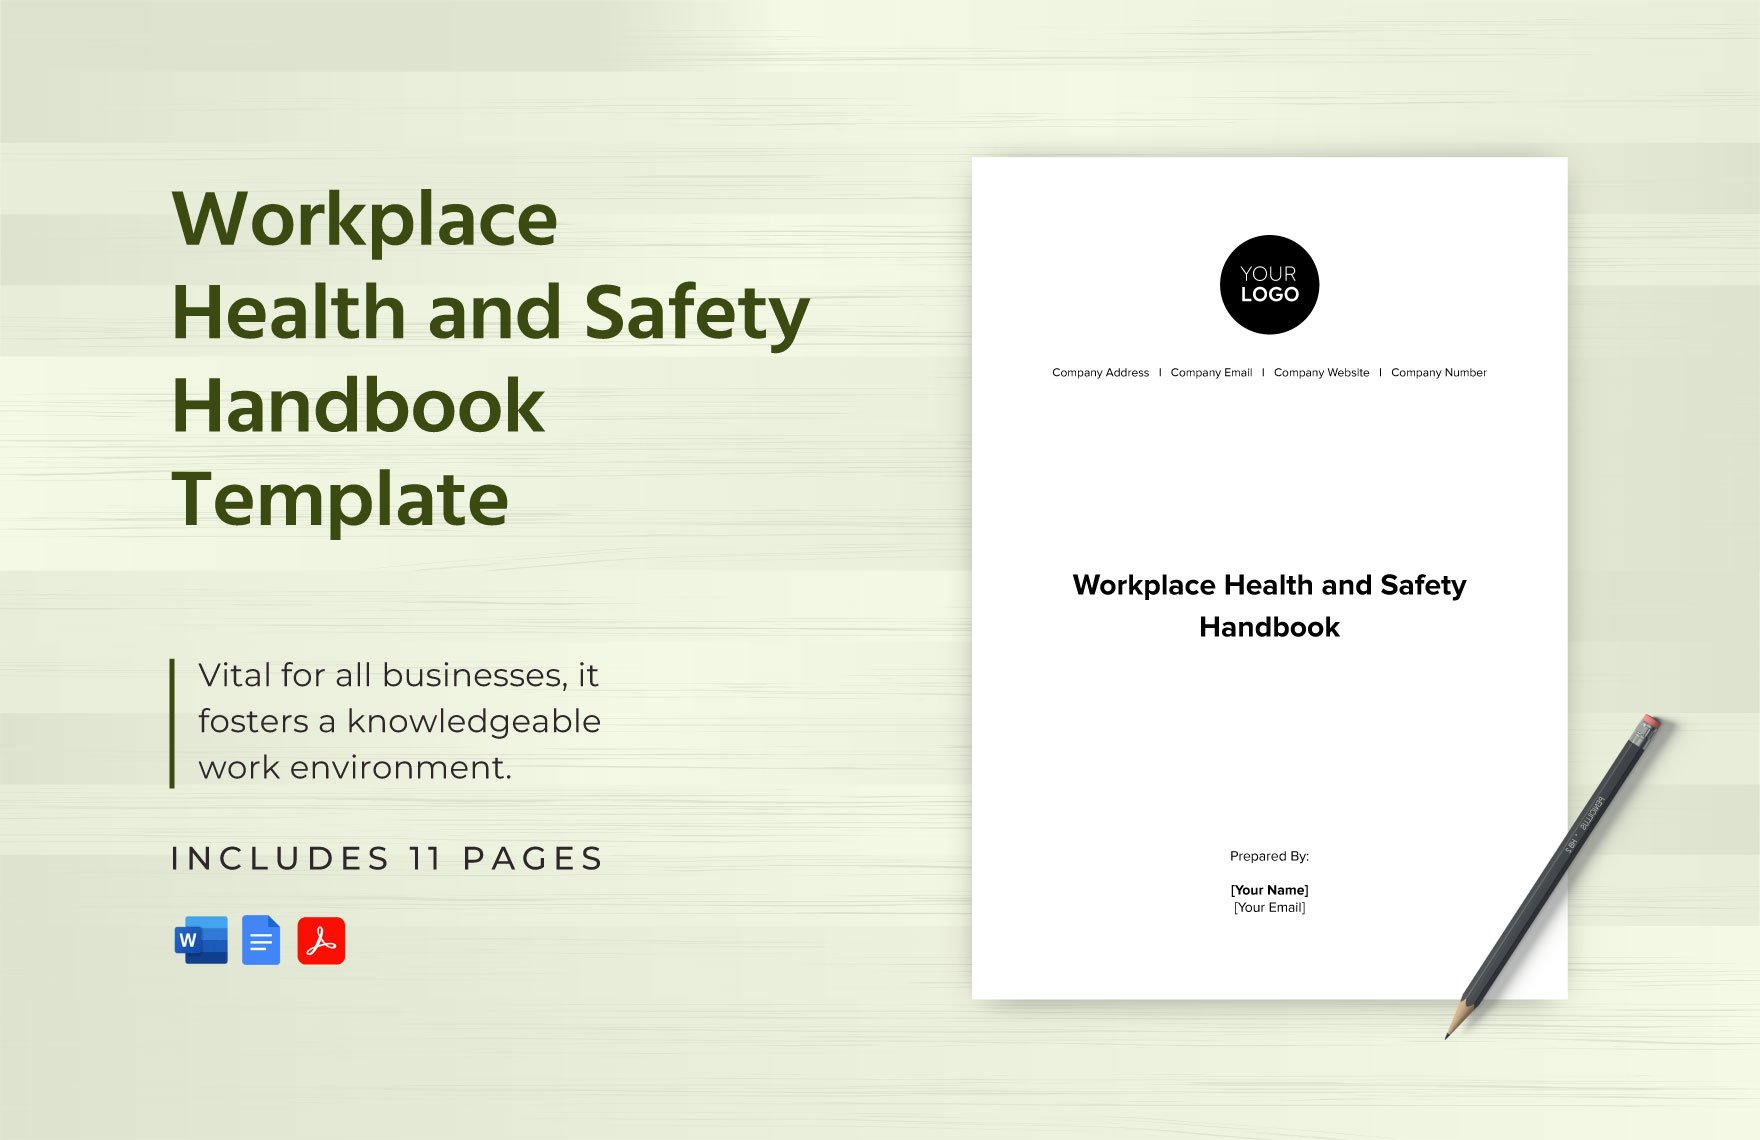 Workplace Health and Safety Handbook Template in Word, Google Docs, PDF